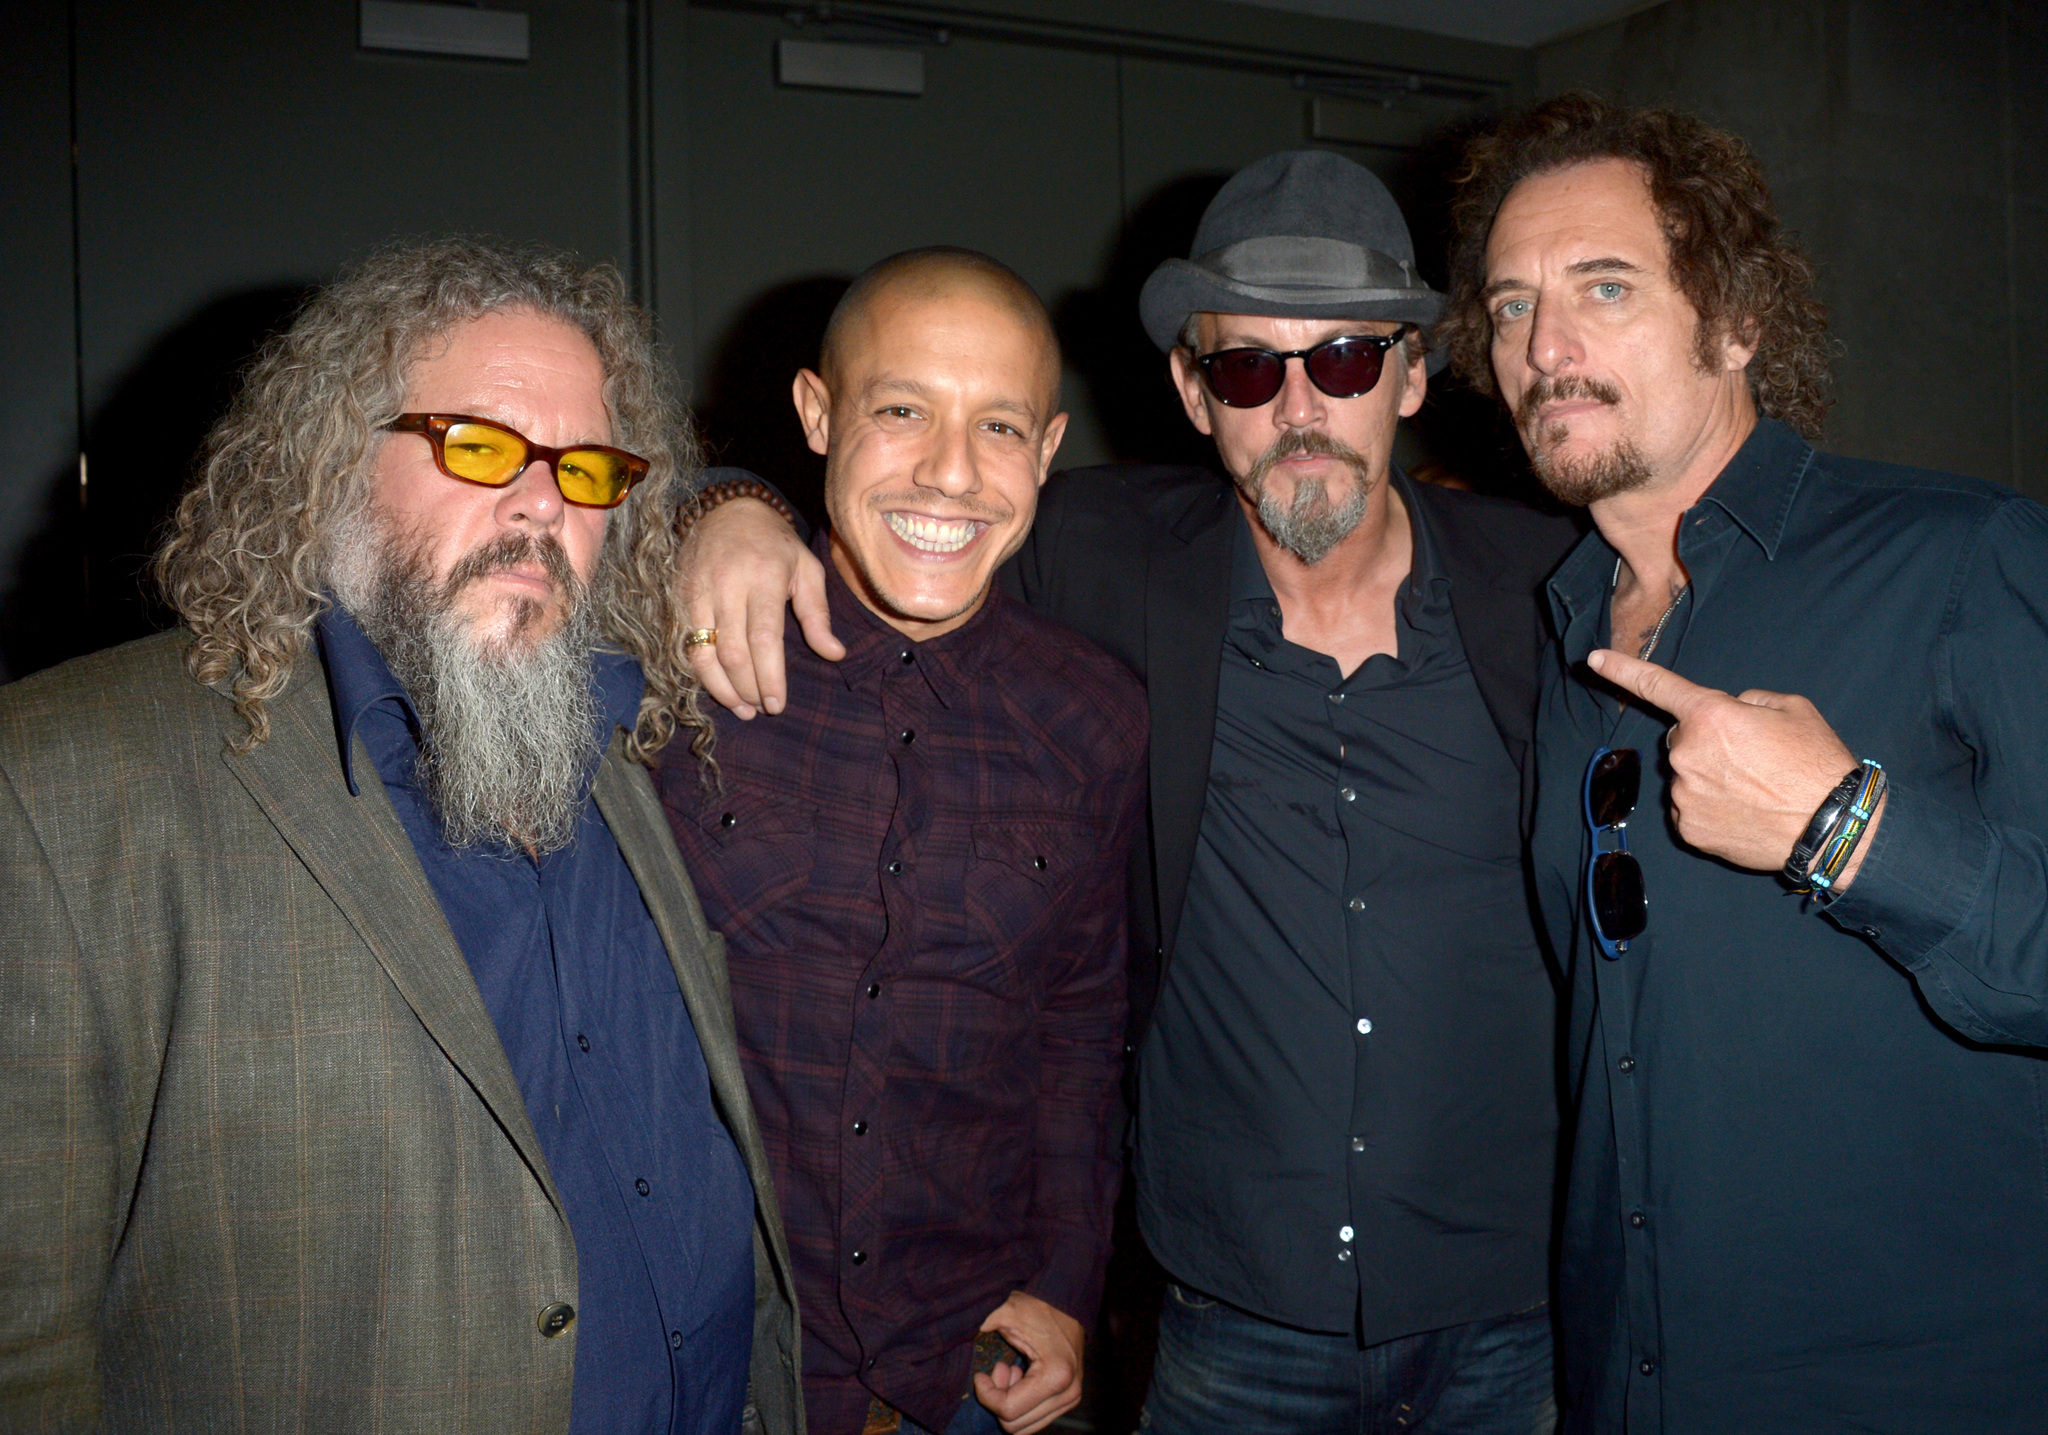 Kim Coates, Tommy Flanagan, Theo Rossi and Mark Boone at event of Sons of Anarchy (2008)